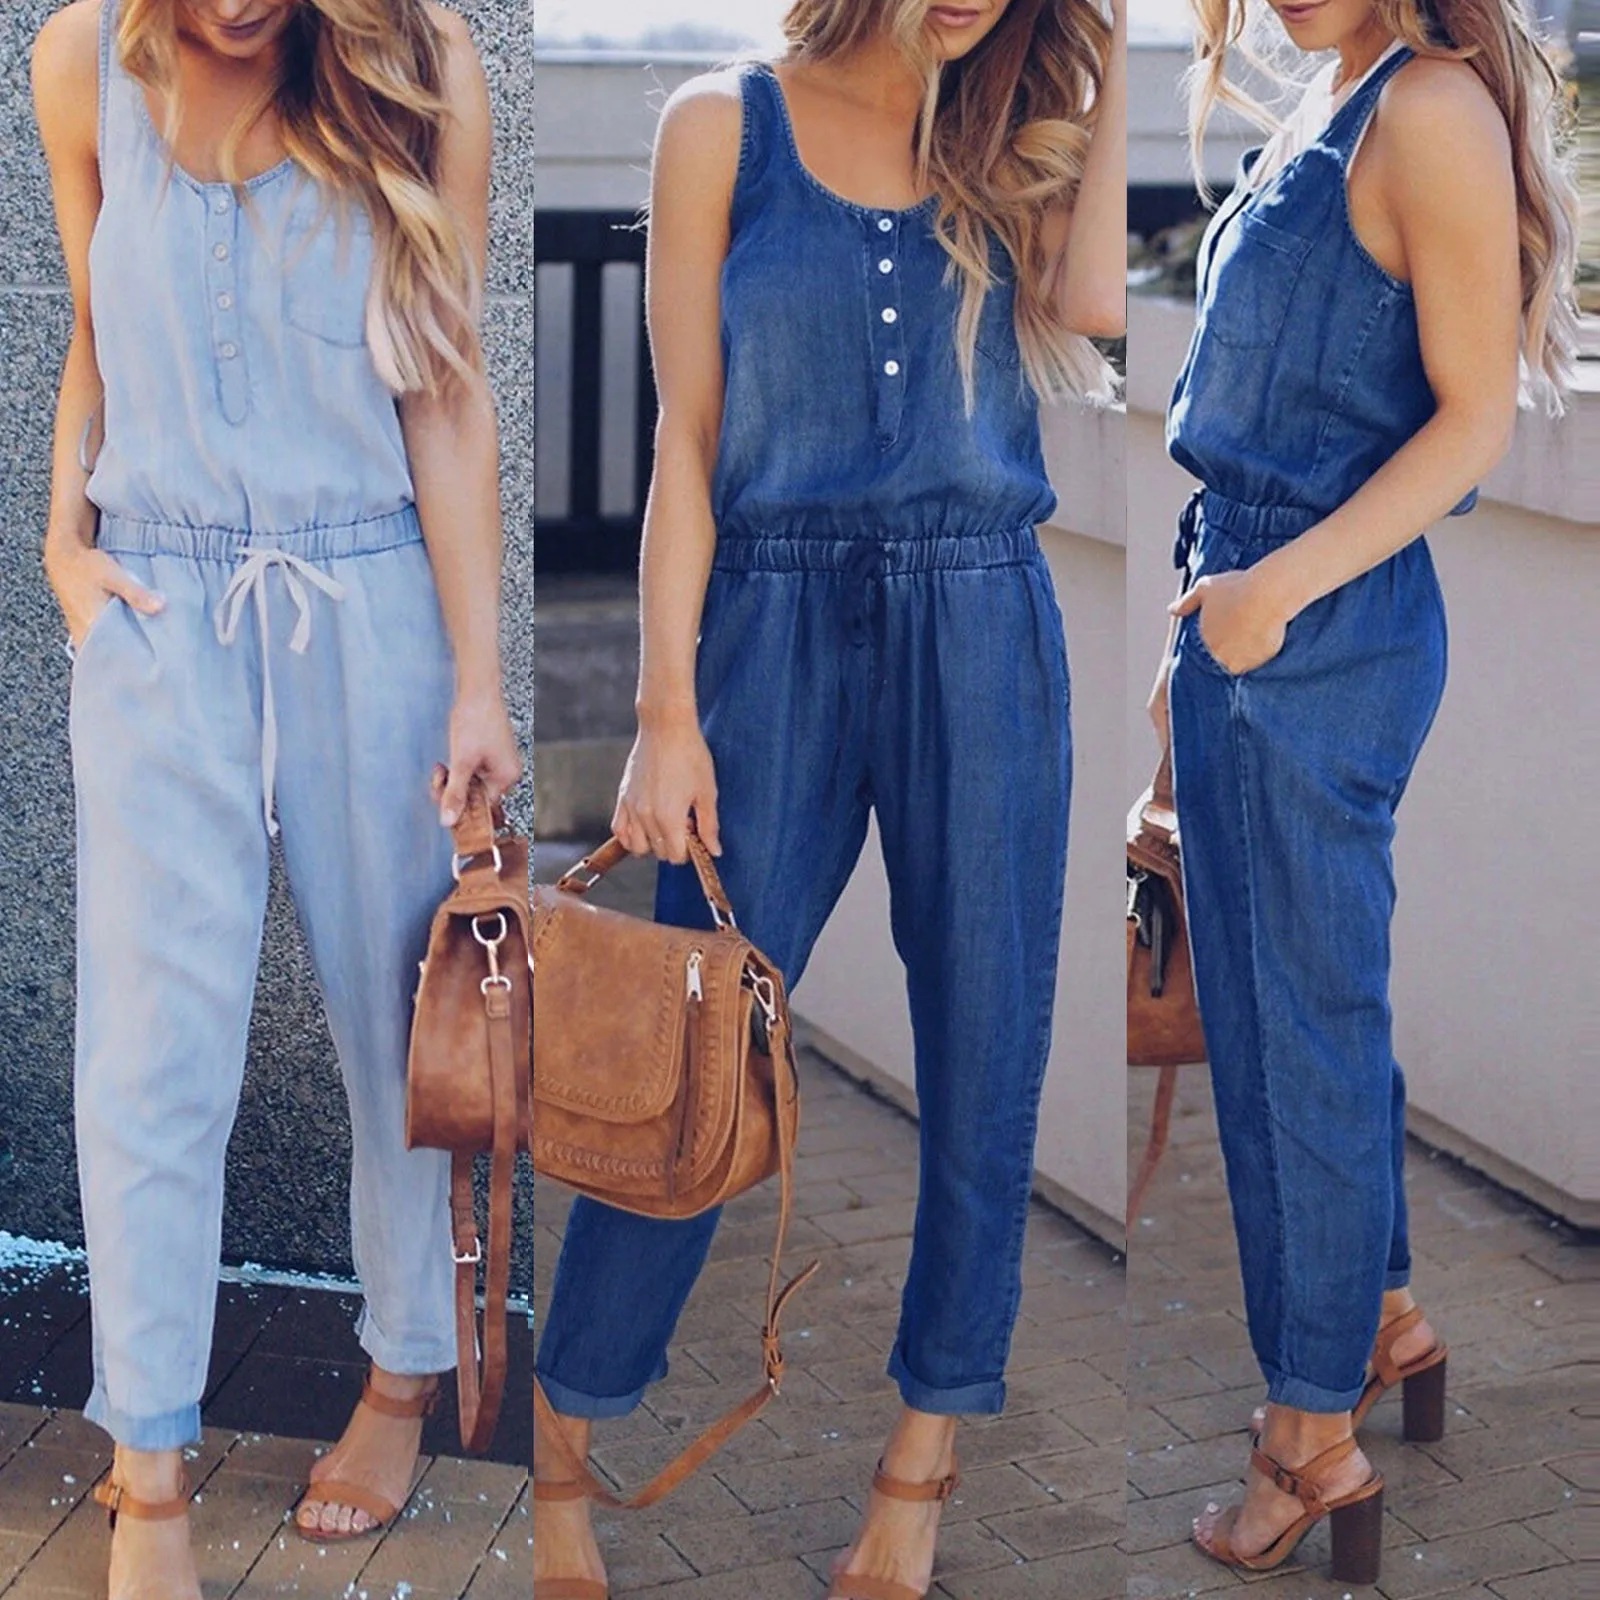 Women-Casual-Sleeveless-Tank-Jumpsuit-Demin-Jeans-Beach-Strappy-Button-Rompers-With-Pockets-Jumpsuit-Bodysuit-Long-2